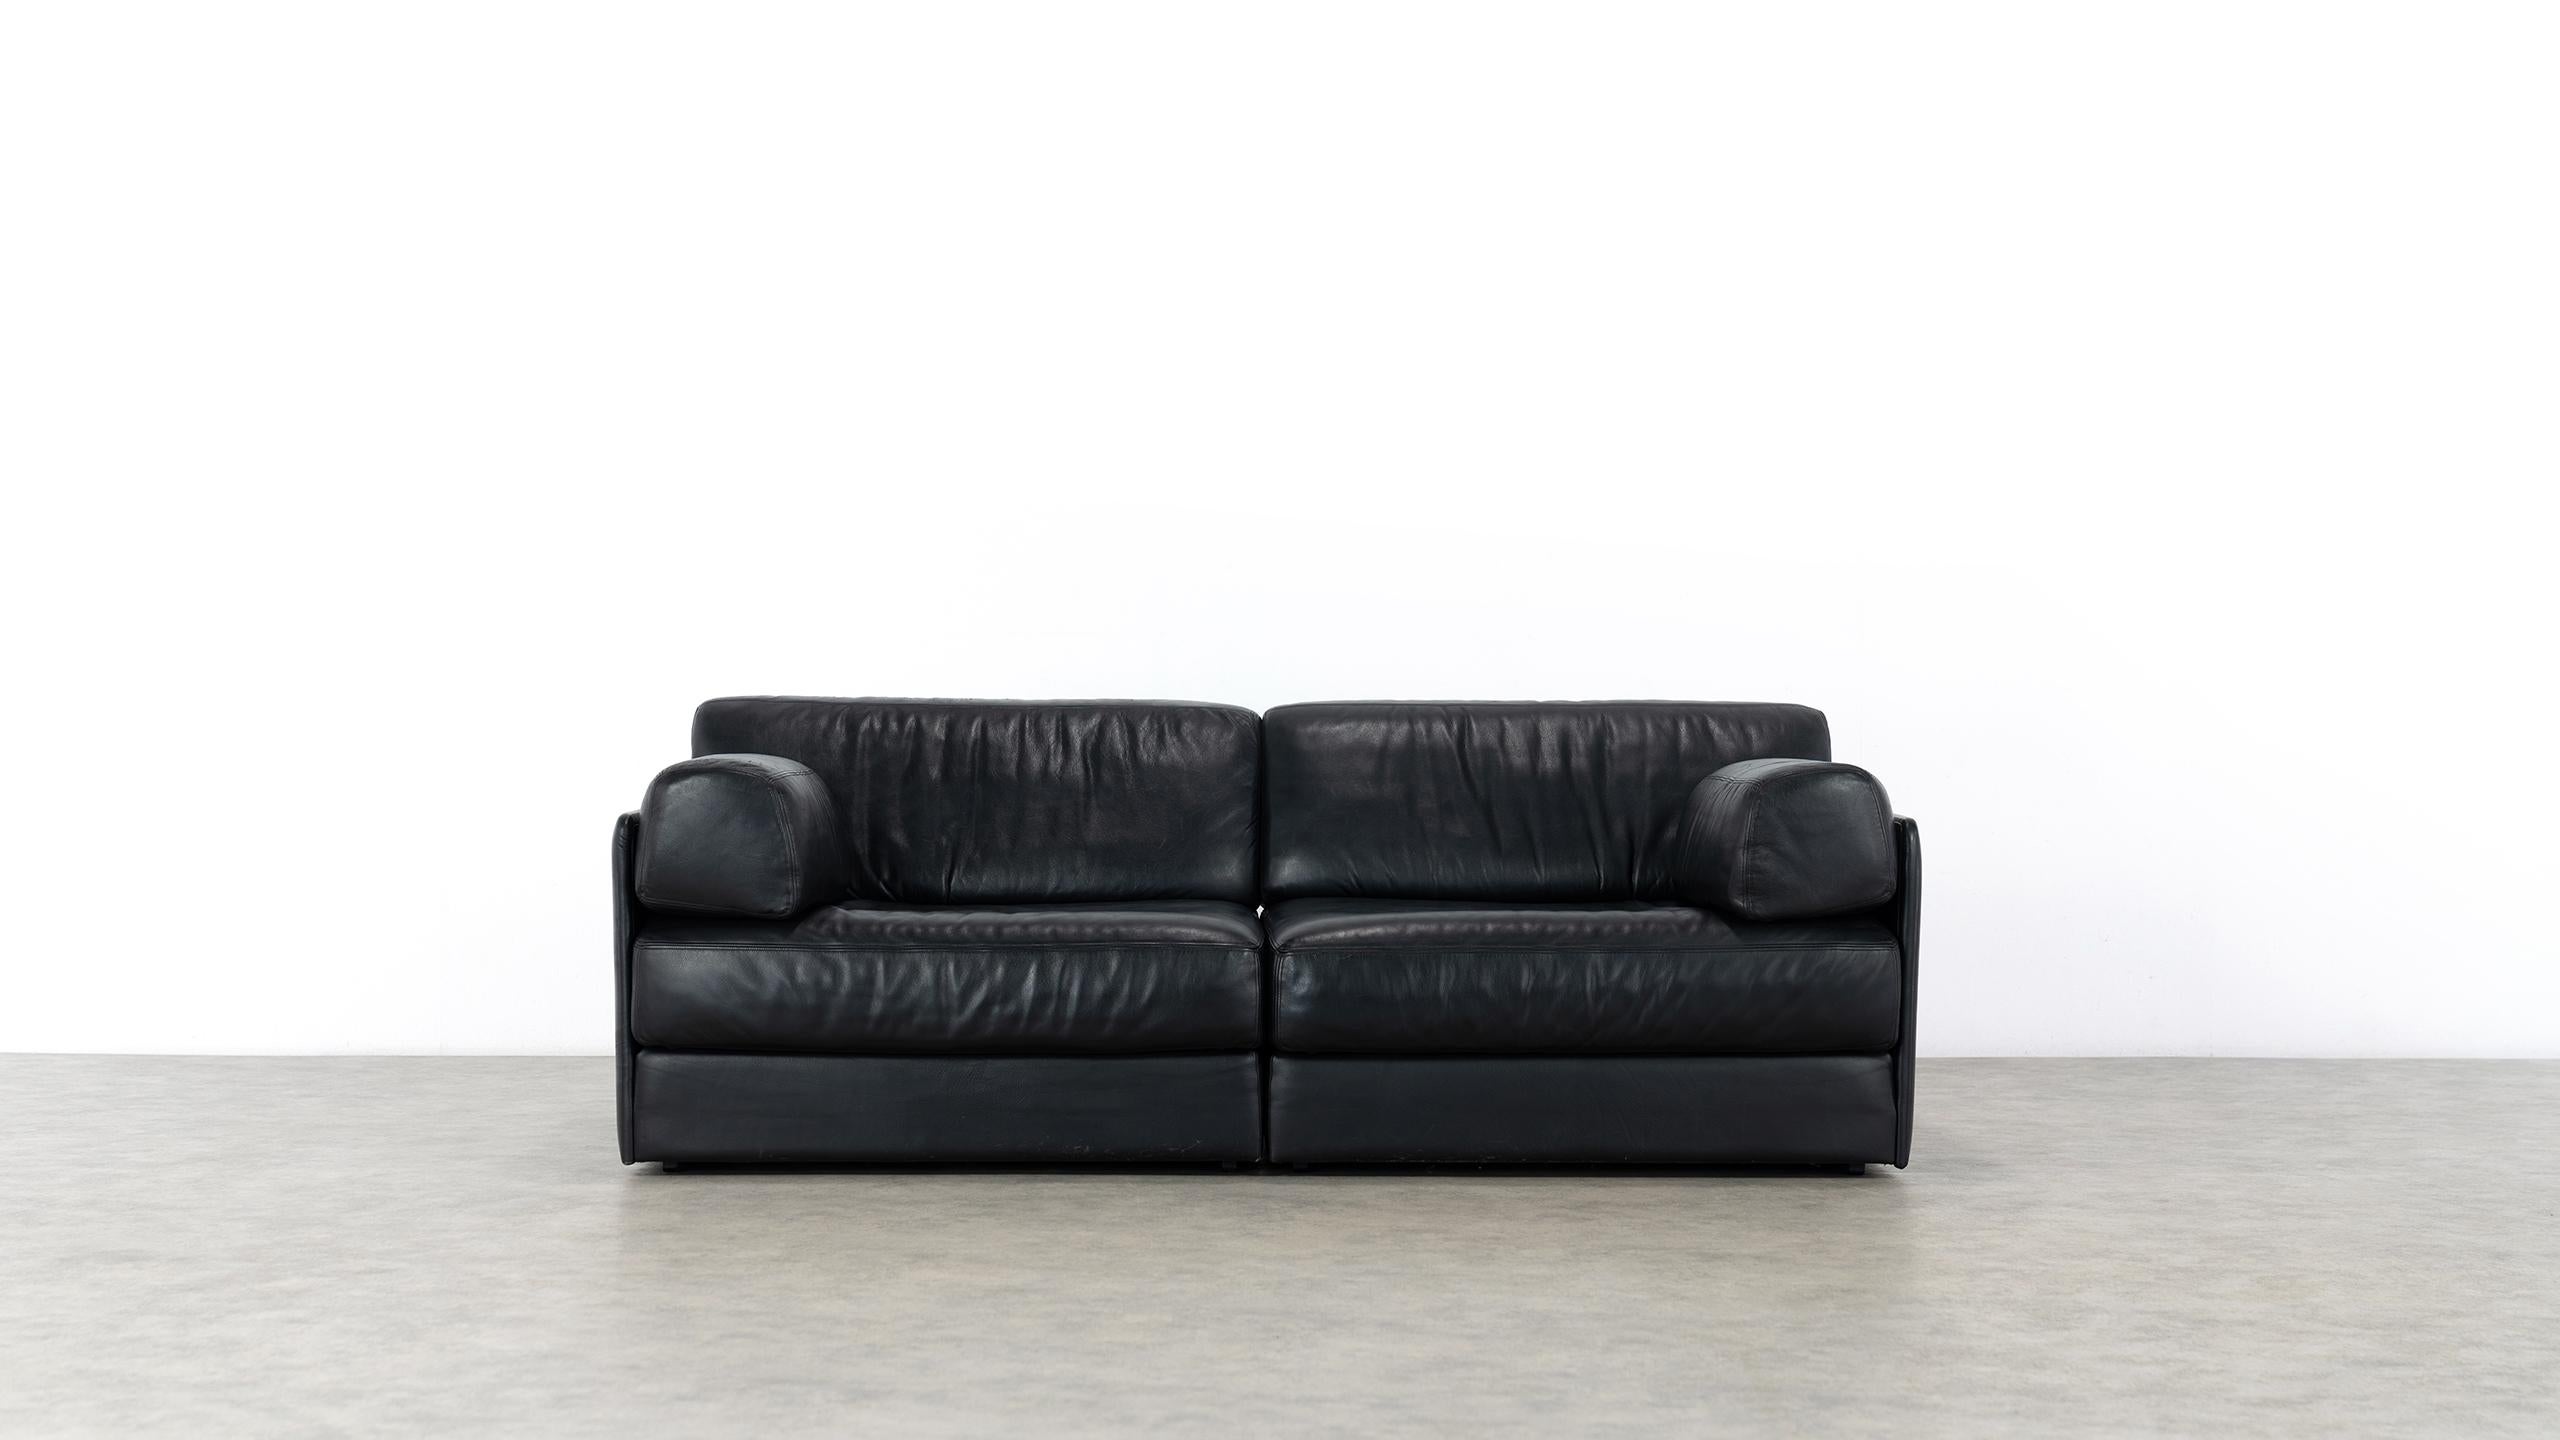 Late 20th Century De Sede Ds76, Sofa & Daybed in Black Leather, 1972 by De Sede Design Team